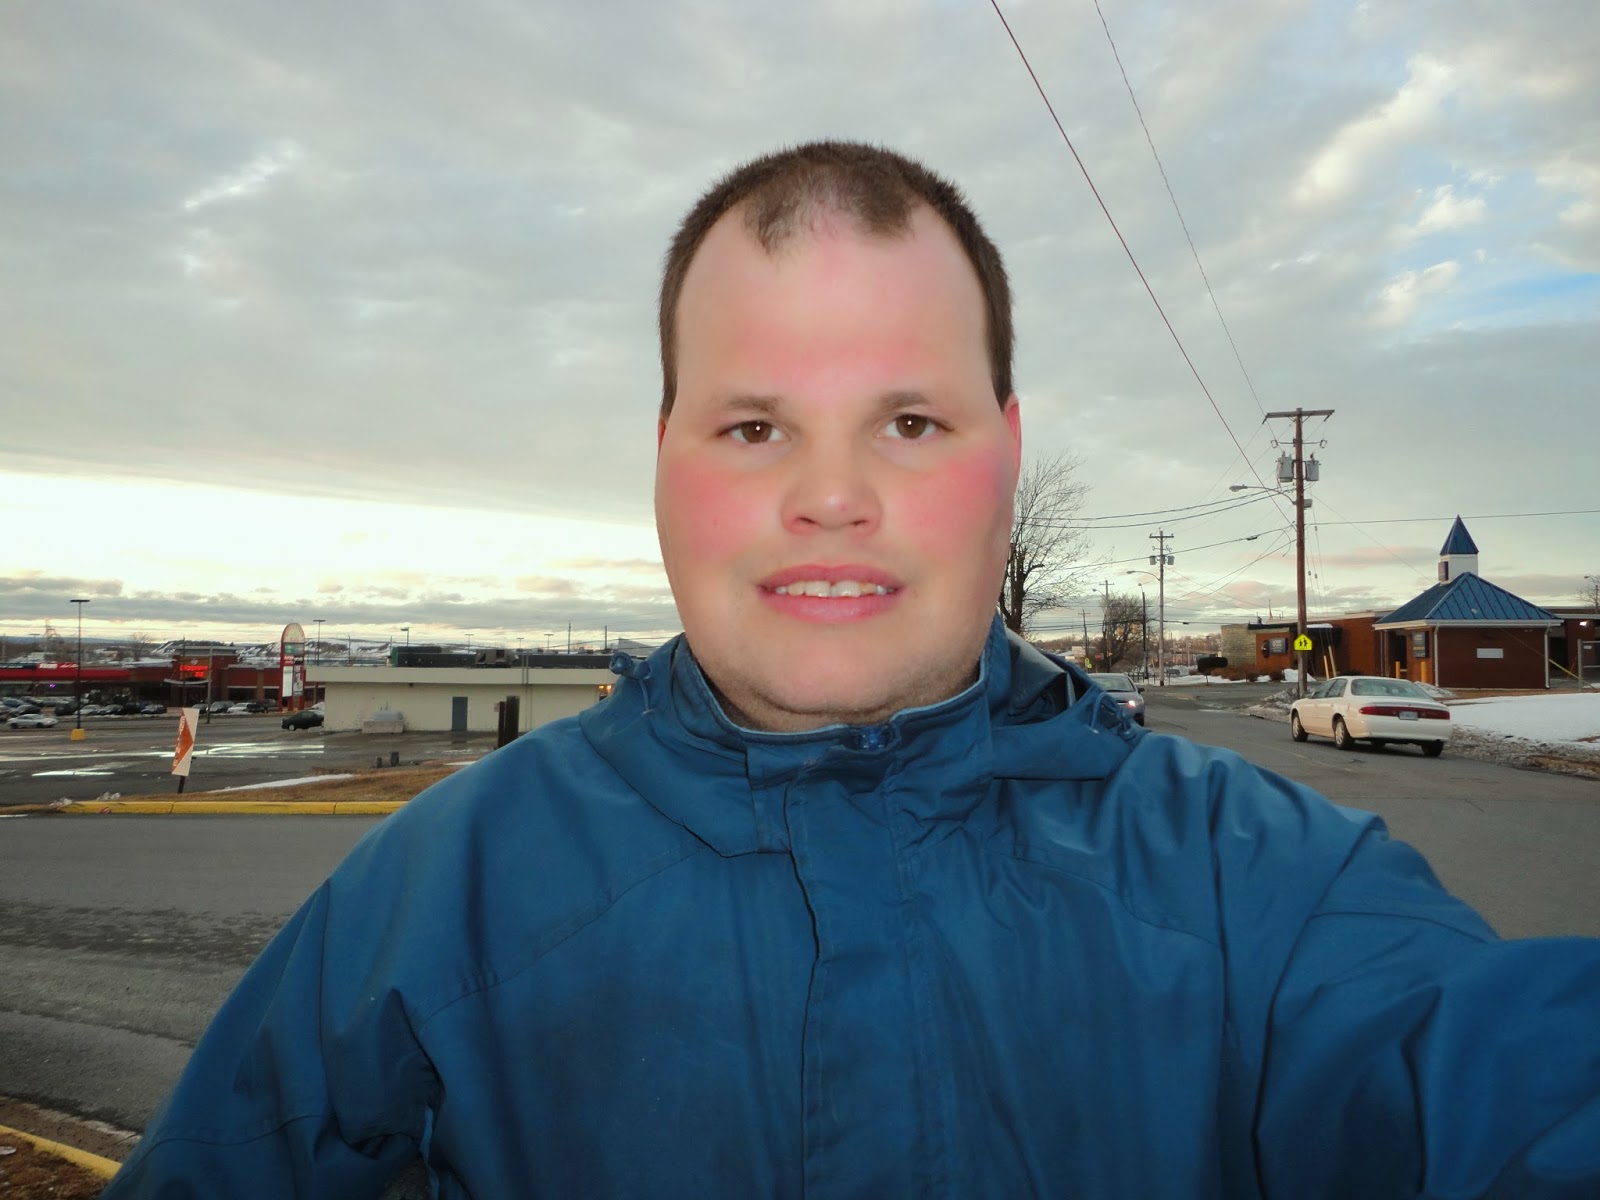 Frankie MacDonald is enjoying his nice evening and he is going for a long walk for something to do.